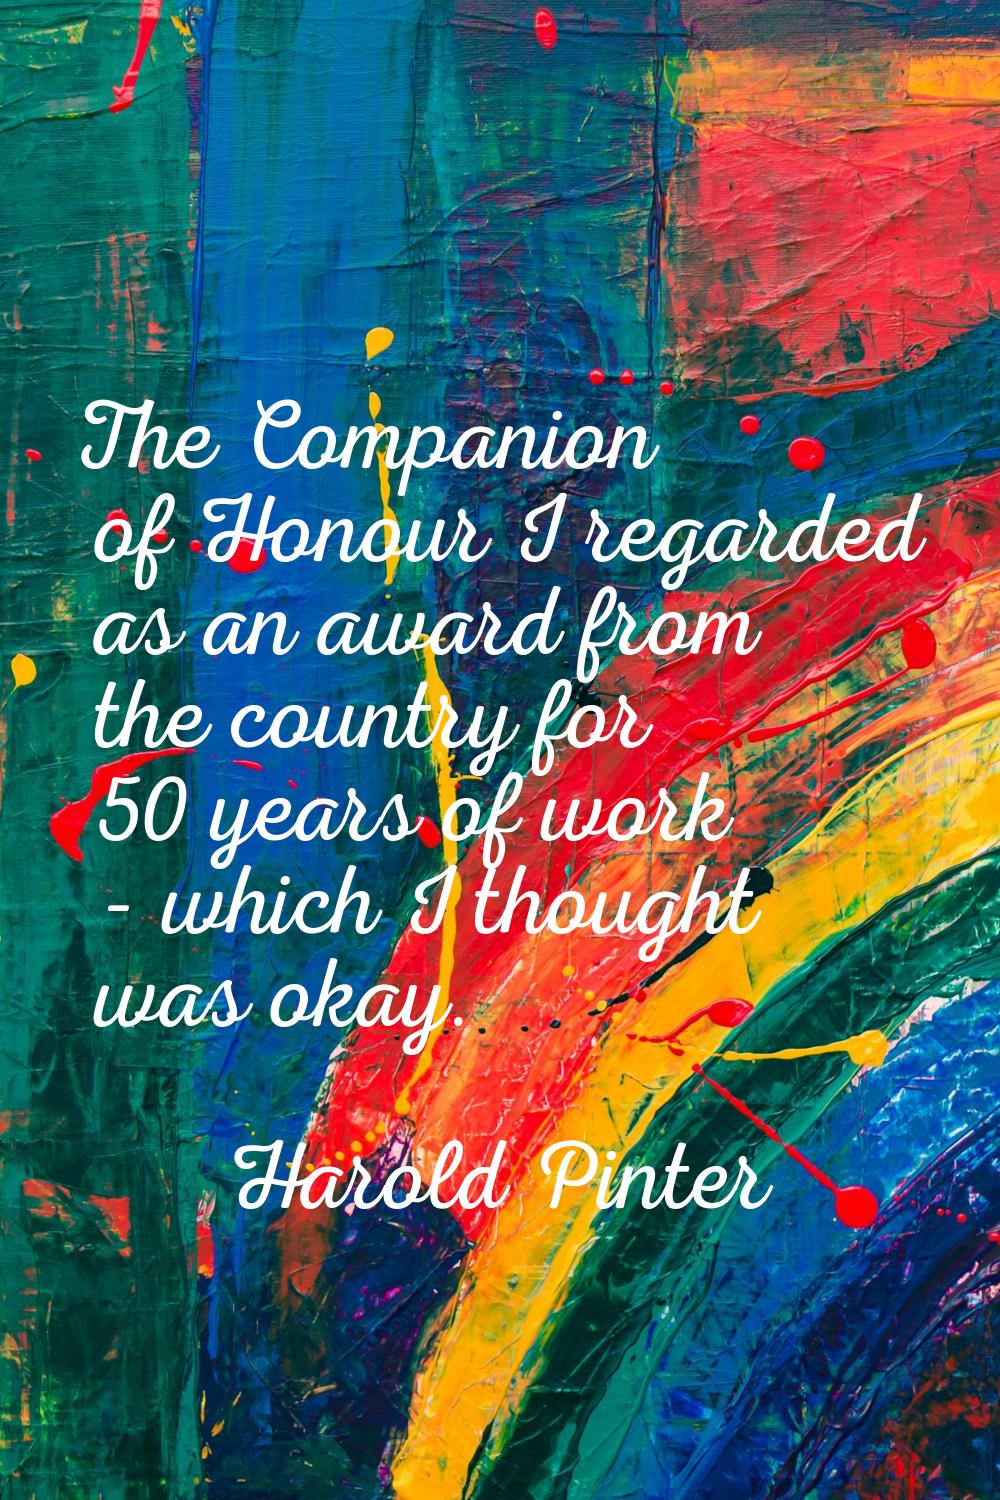 The Companion of Honour I regarded as an award from the country for 50 years of work - which I thou